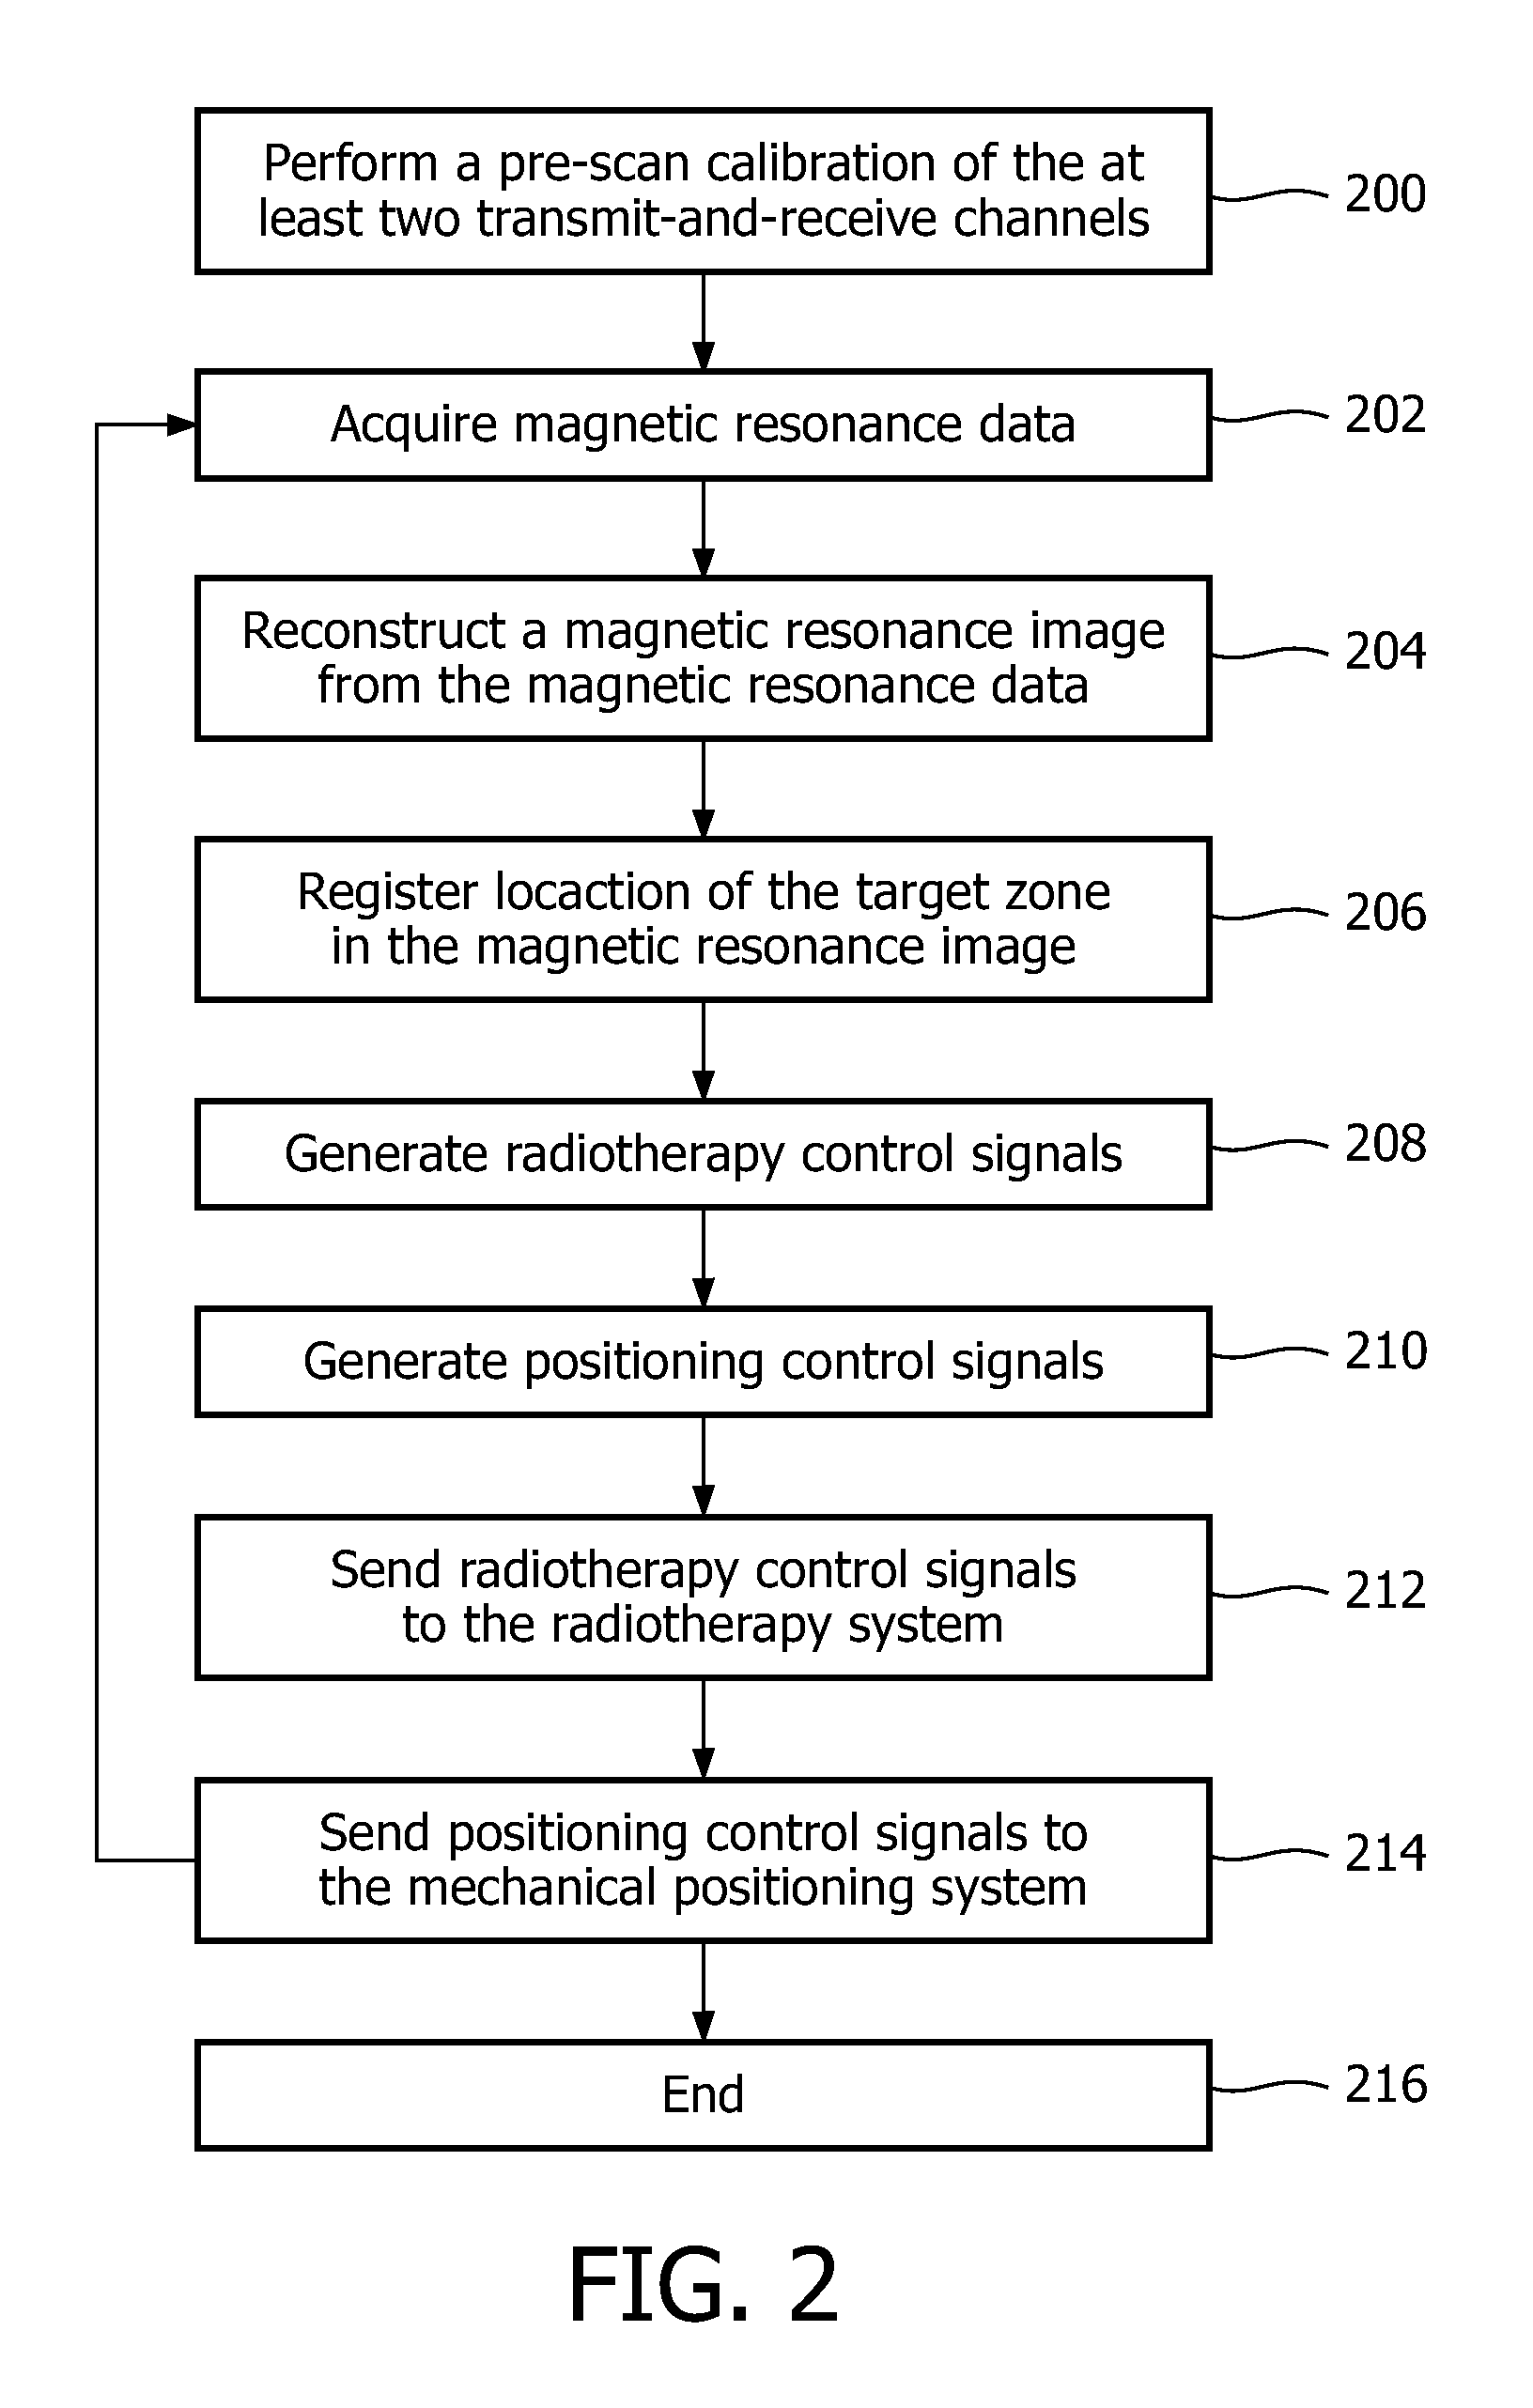 Magnetic resonance imaging and radiotherapy apparatus with at least two-transmit-and receive channels